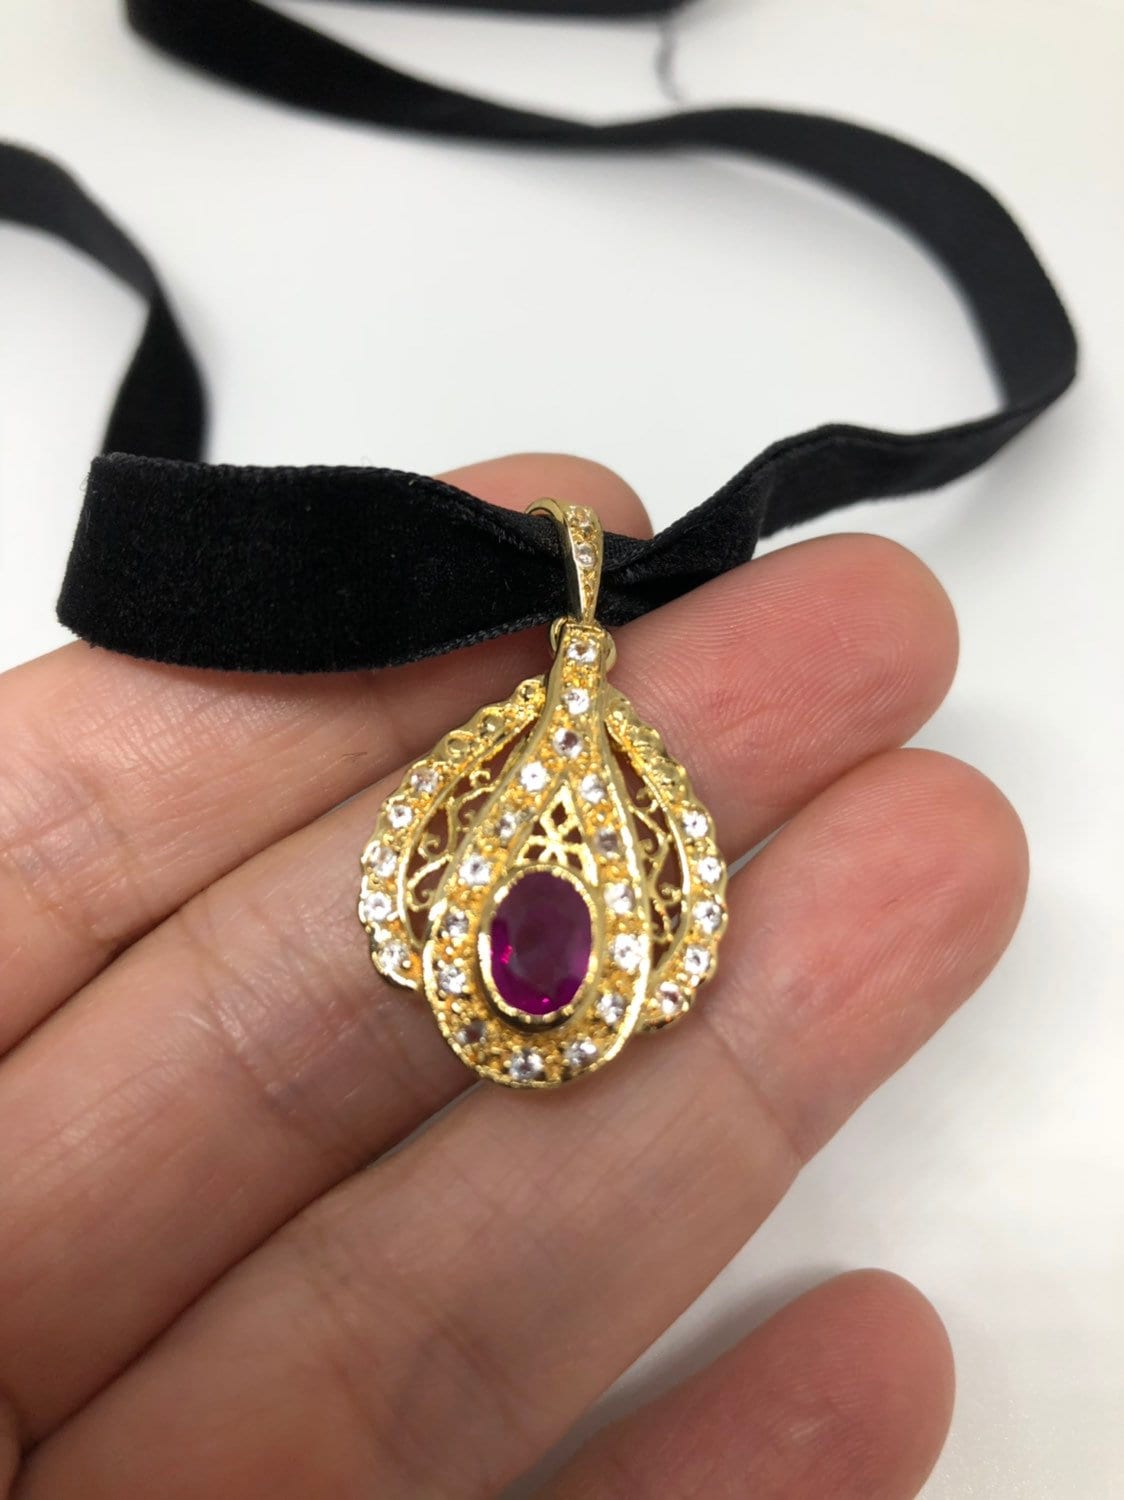 Vintage Ruby Choker 925 Sterling Silver Gold Rhodium Pendant Necklace